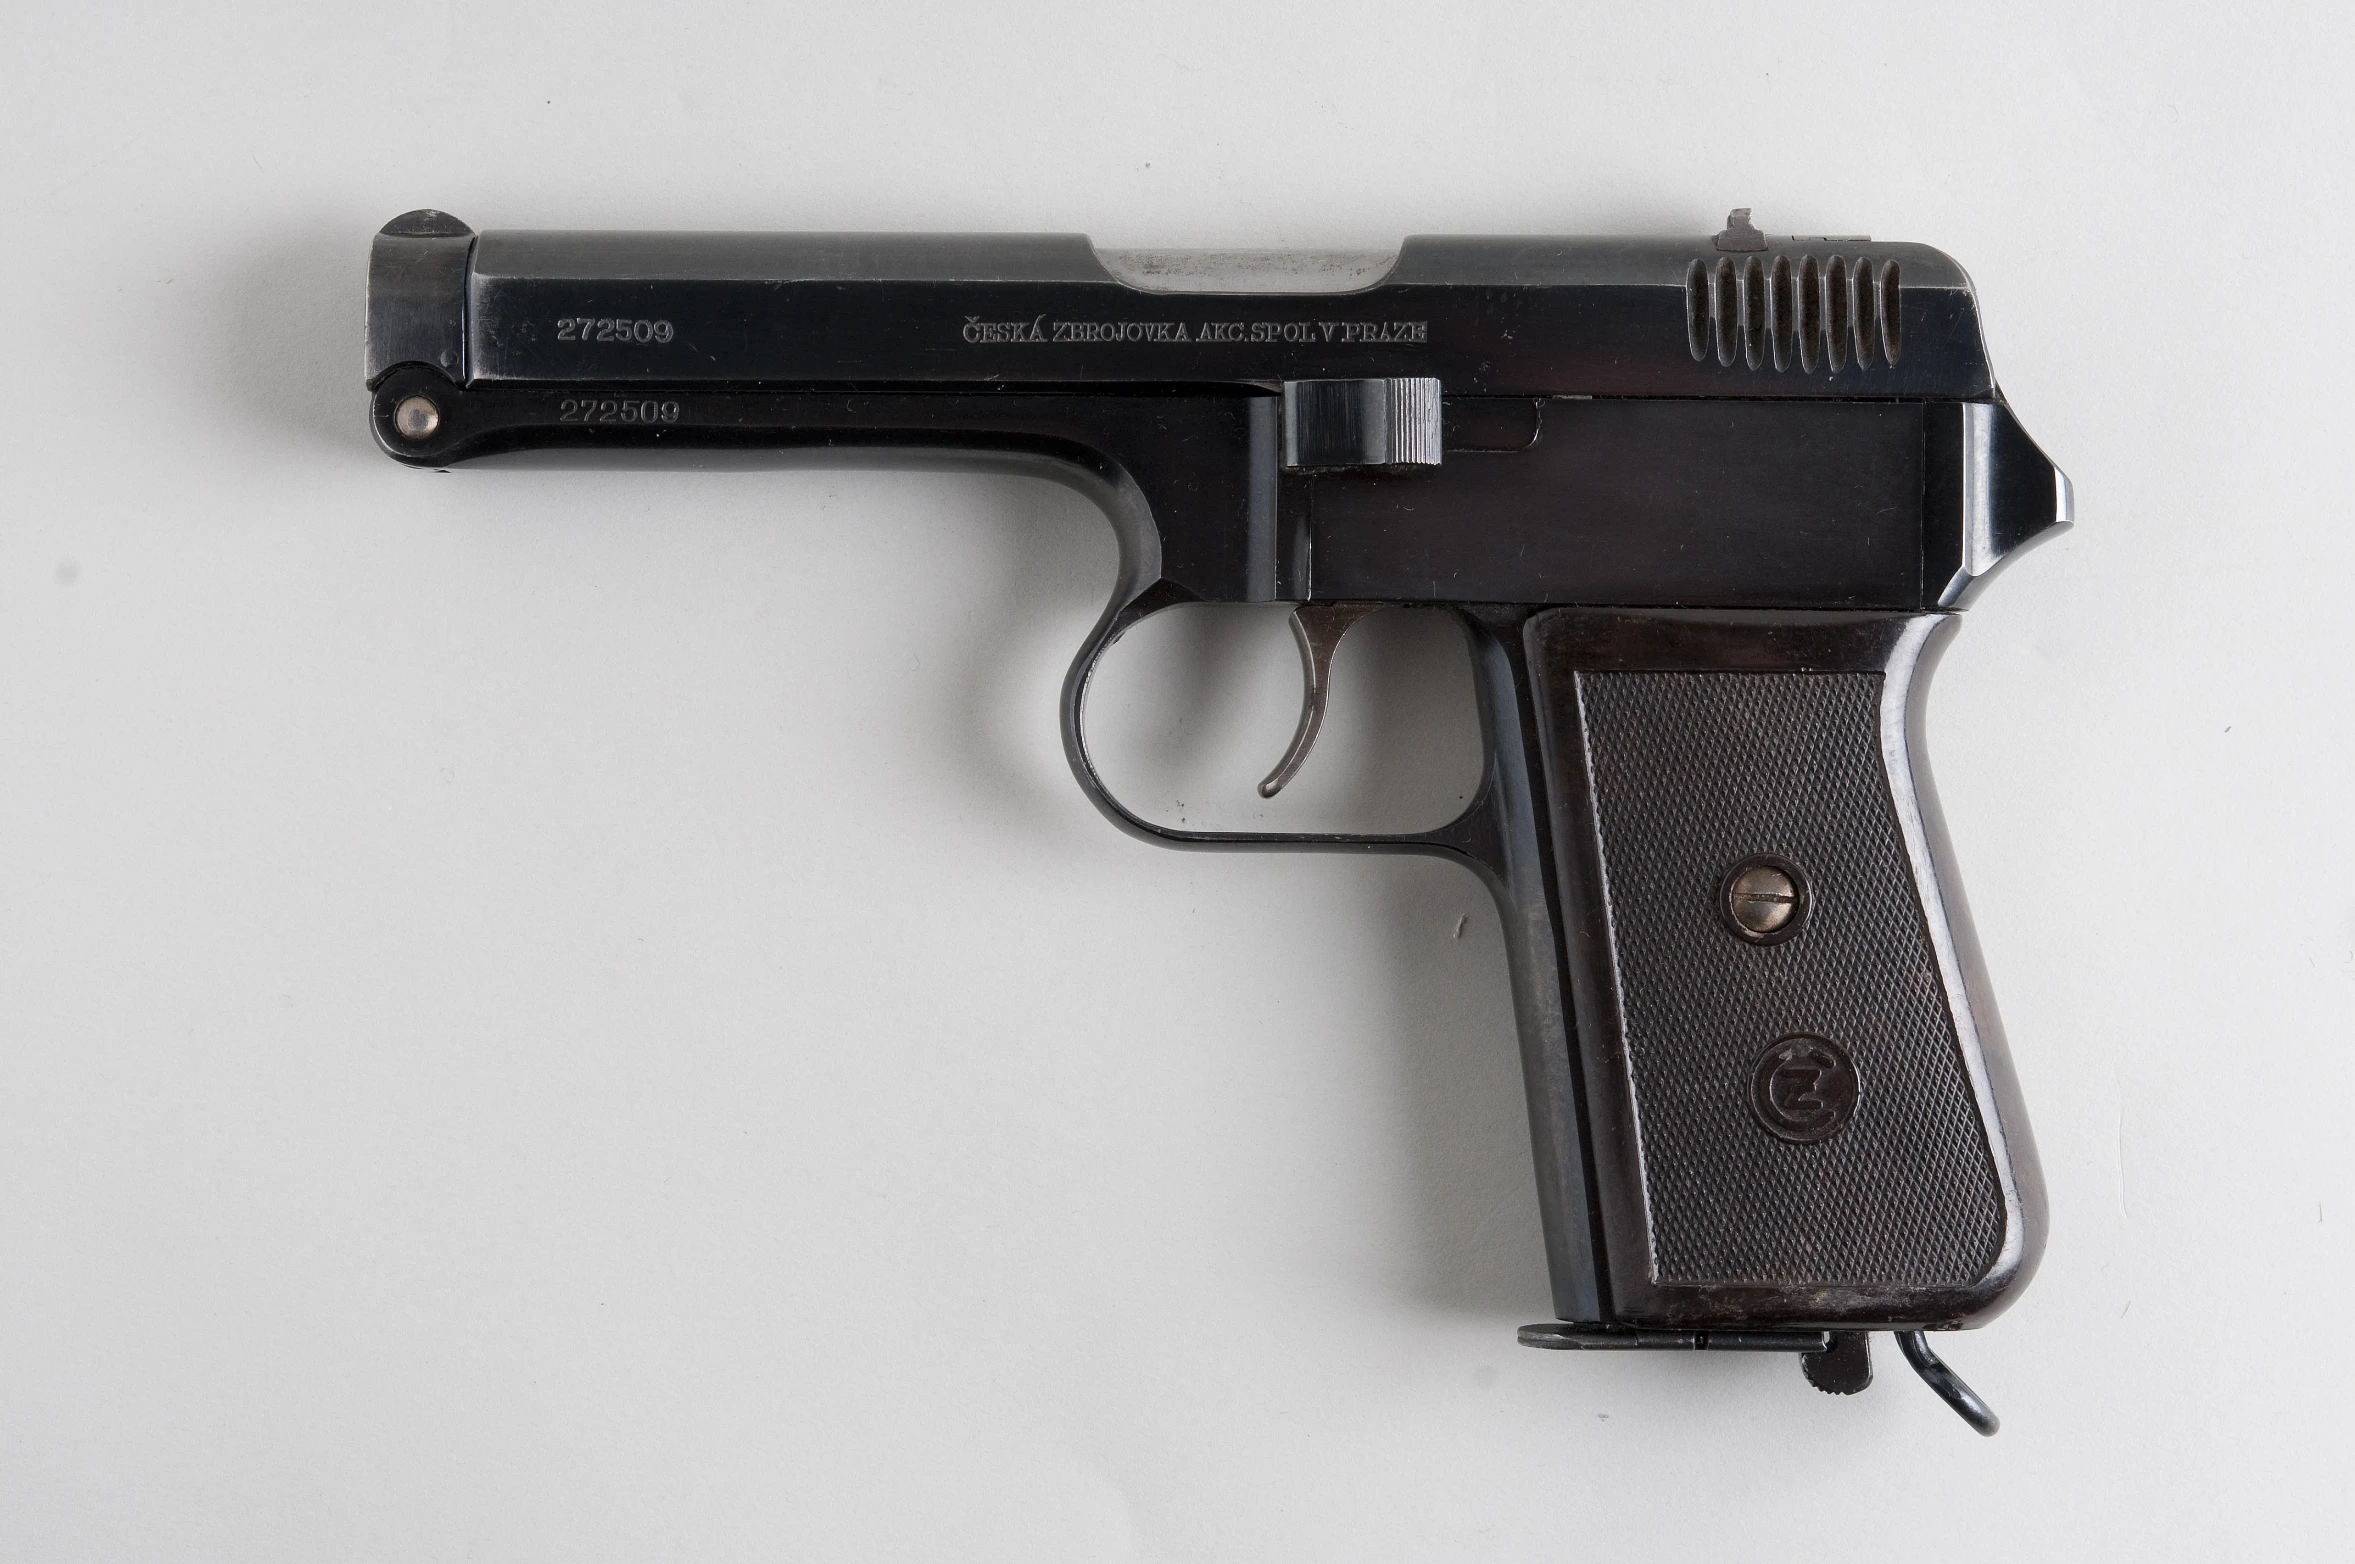 a black 1911 pistol, with the marked no 32